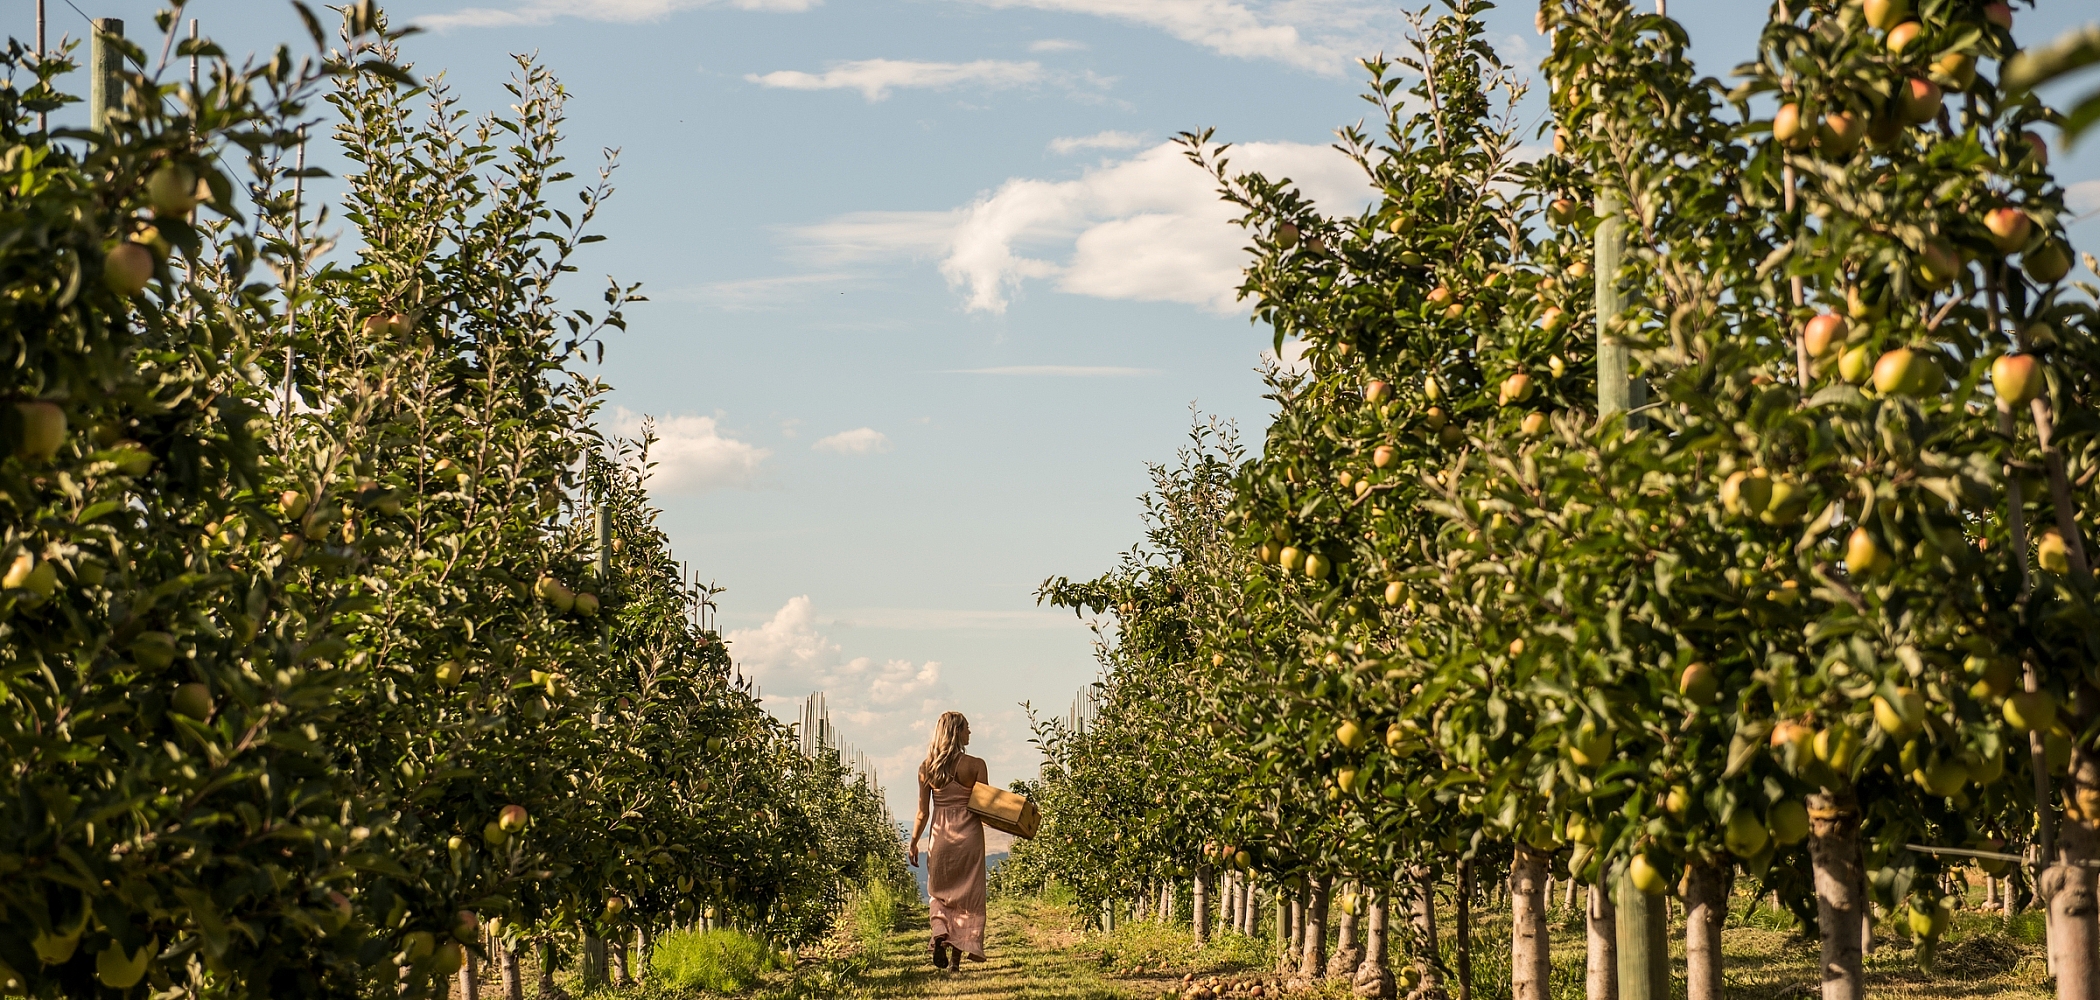 A person in a long dress walks through an orchard filled with rows of apple trees. They carry a basket, suggesting they are either picking or gathering apples. The sky is clear with a few clouds, and the scene is bathed in warm, late-afternoon sunlight. Apples are visible on the trees, and some have fallen on the ground.